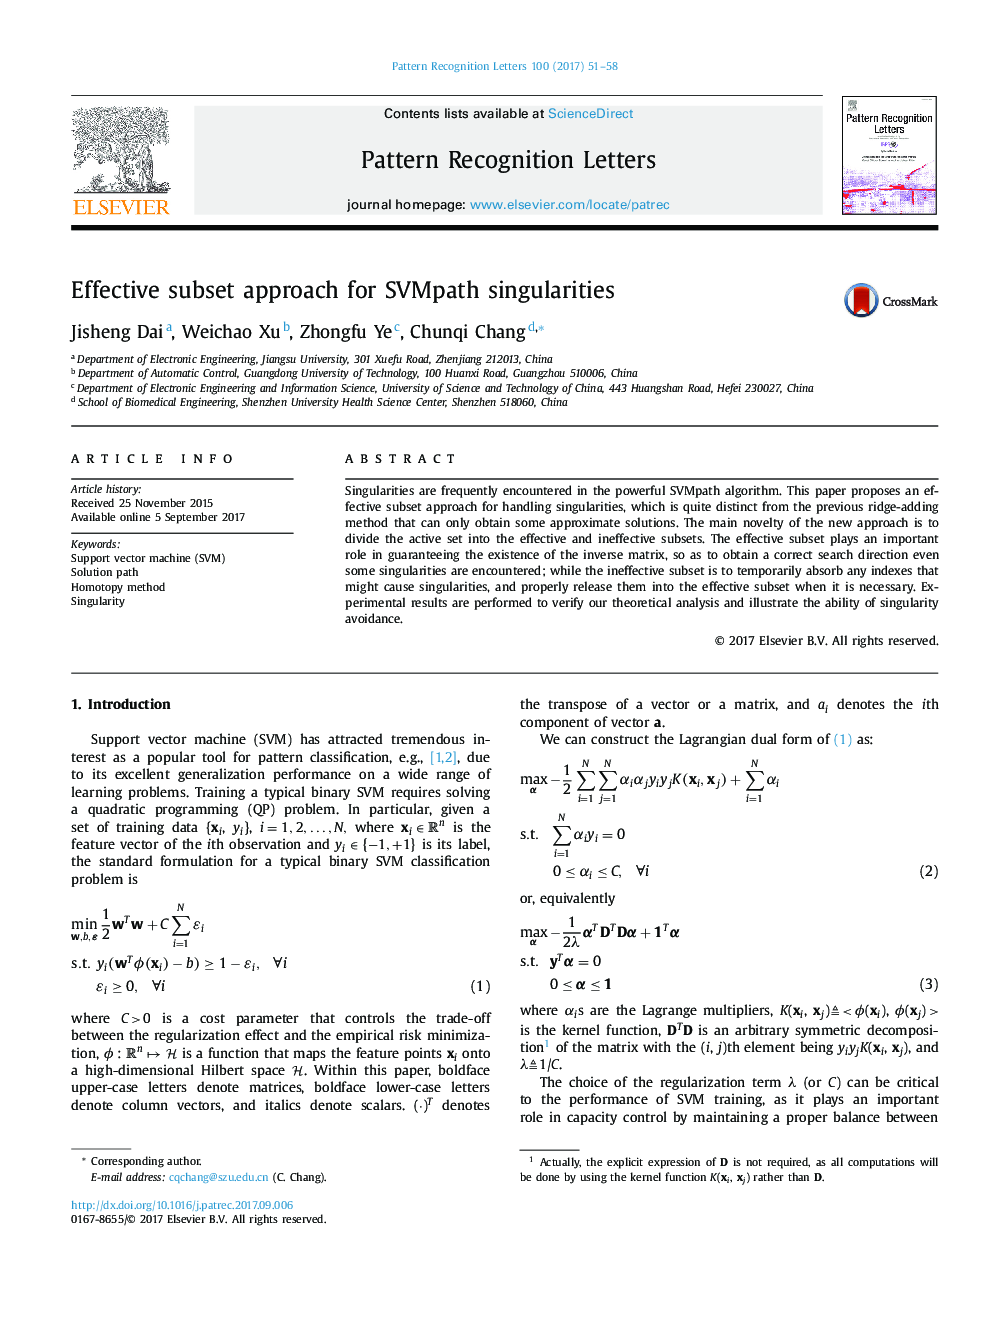 Effective subset approach for SVMpath singularities